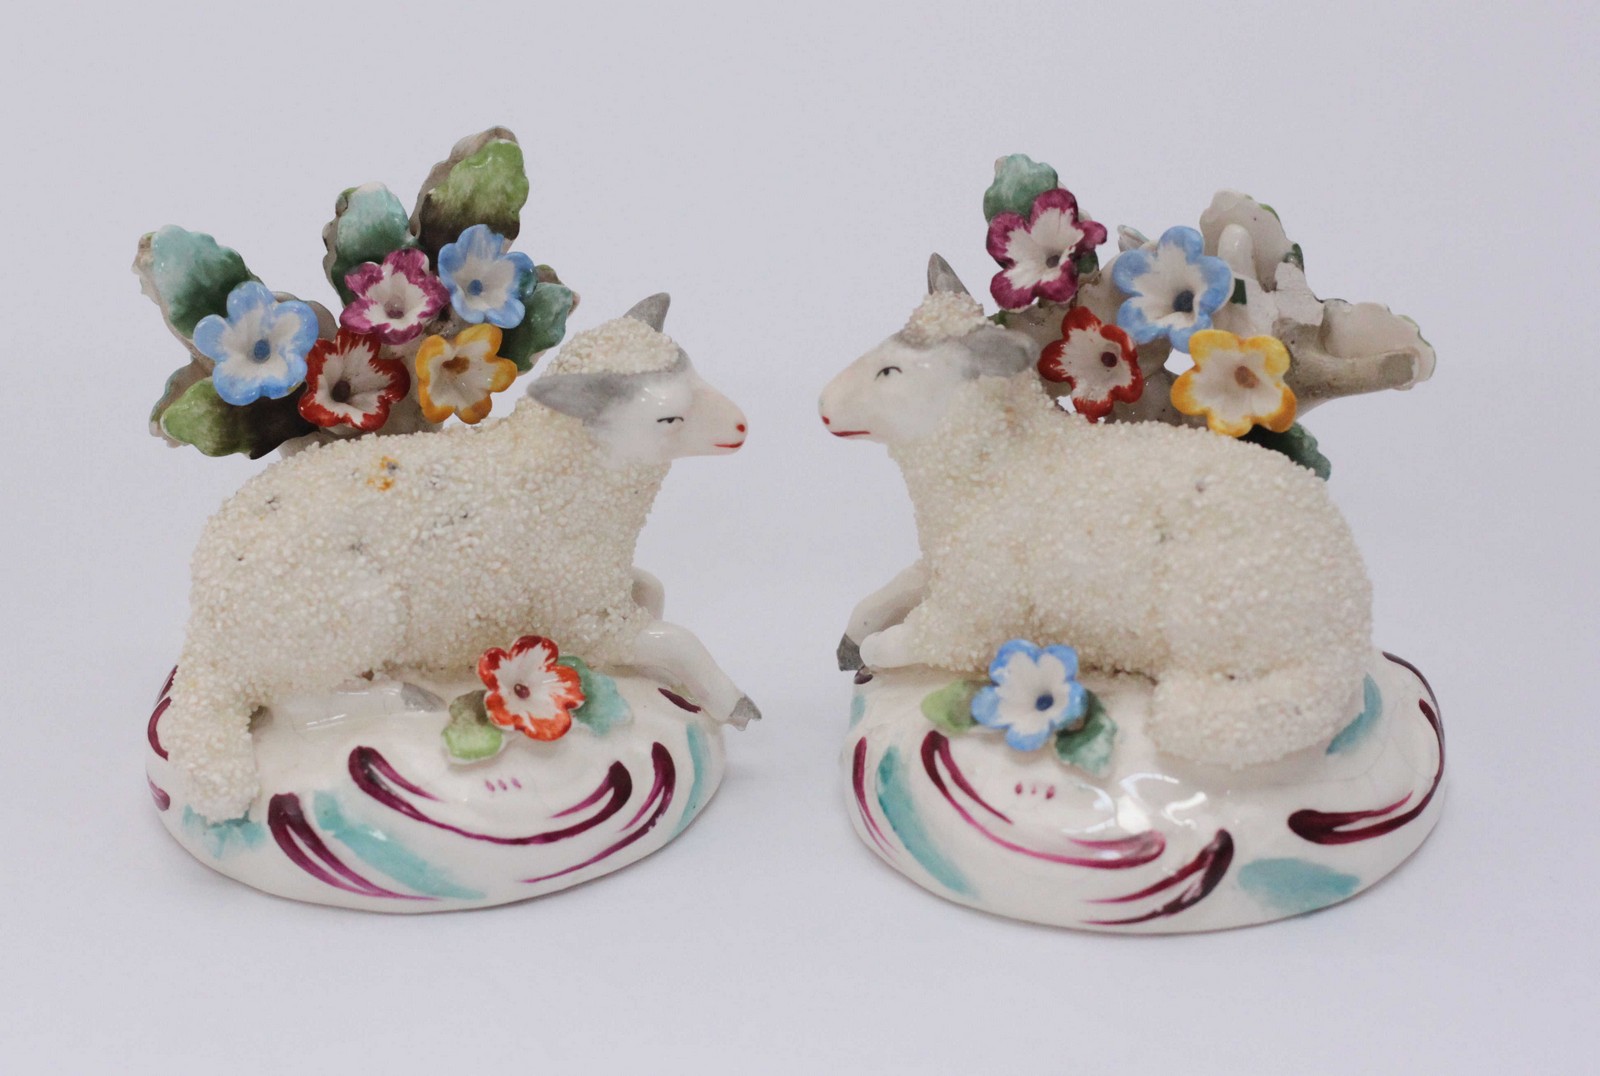 A pair of porcelain figures in the Chelsea style, modelled as recumbent sheep lying next to floral